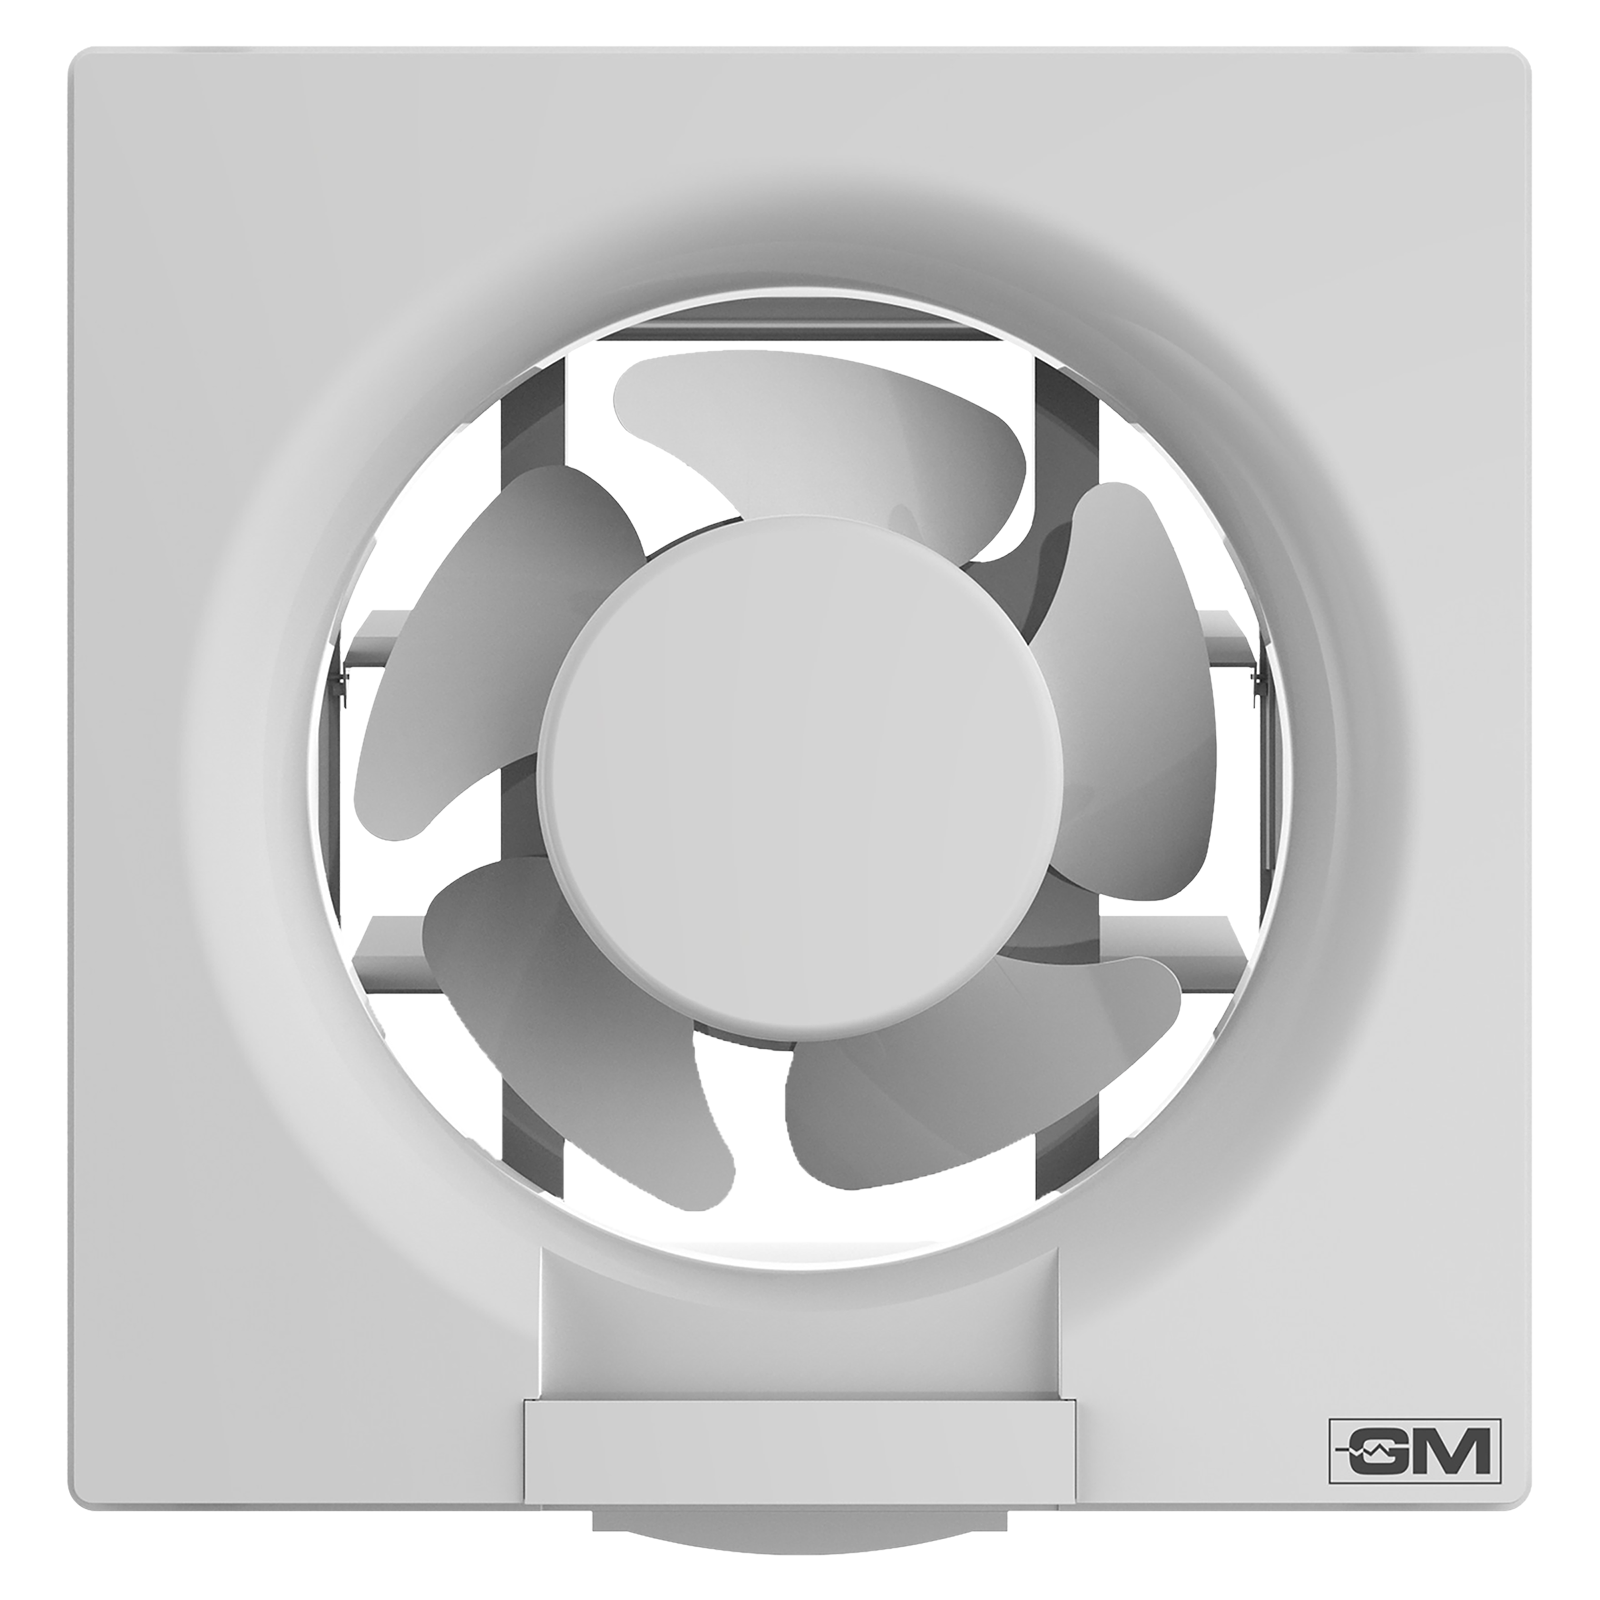 GM Eco Air 150mm Exhaust Fan (Low Noise Operation, White)